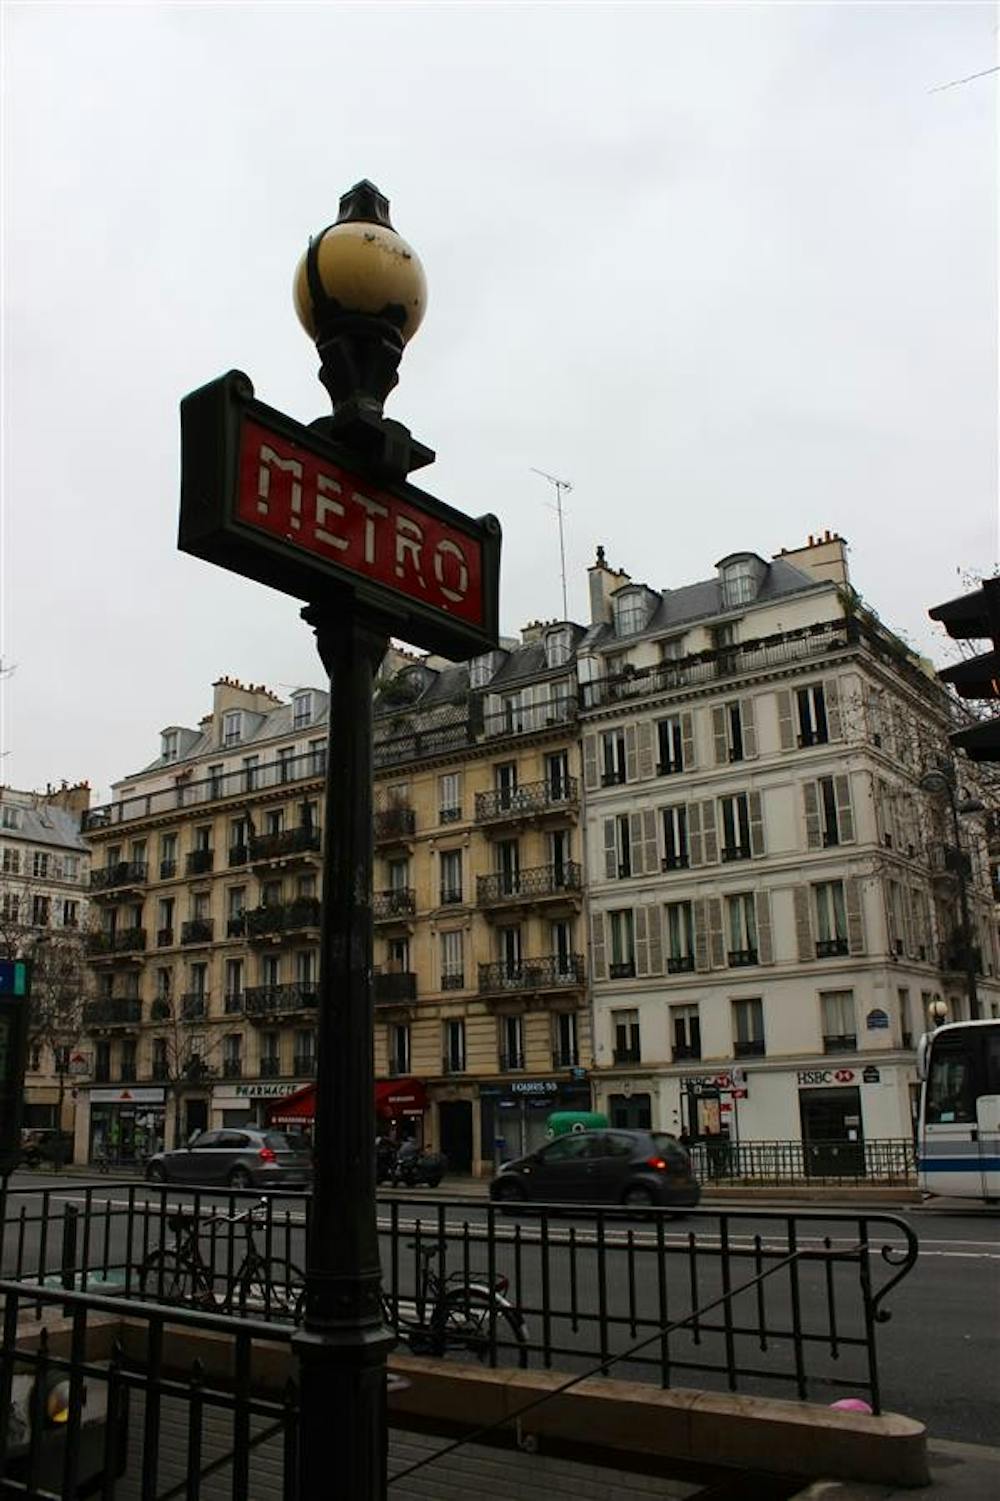 The Paris Metro is a train line that functions both underground and above ground. The line is similar to train systems in the United States.